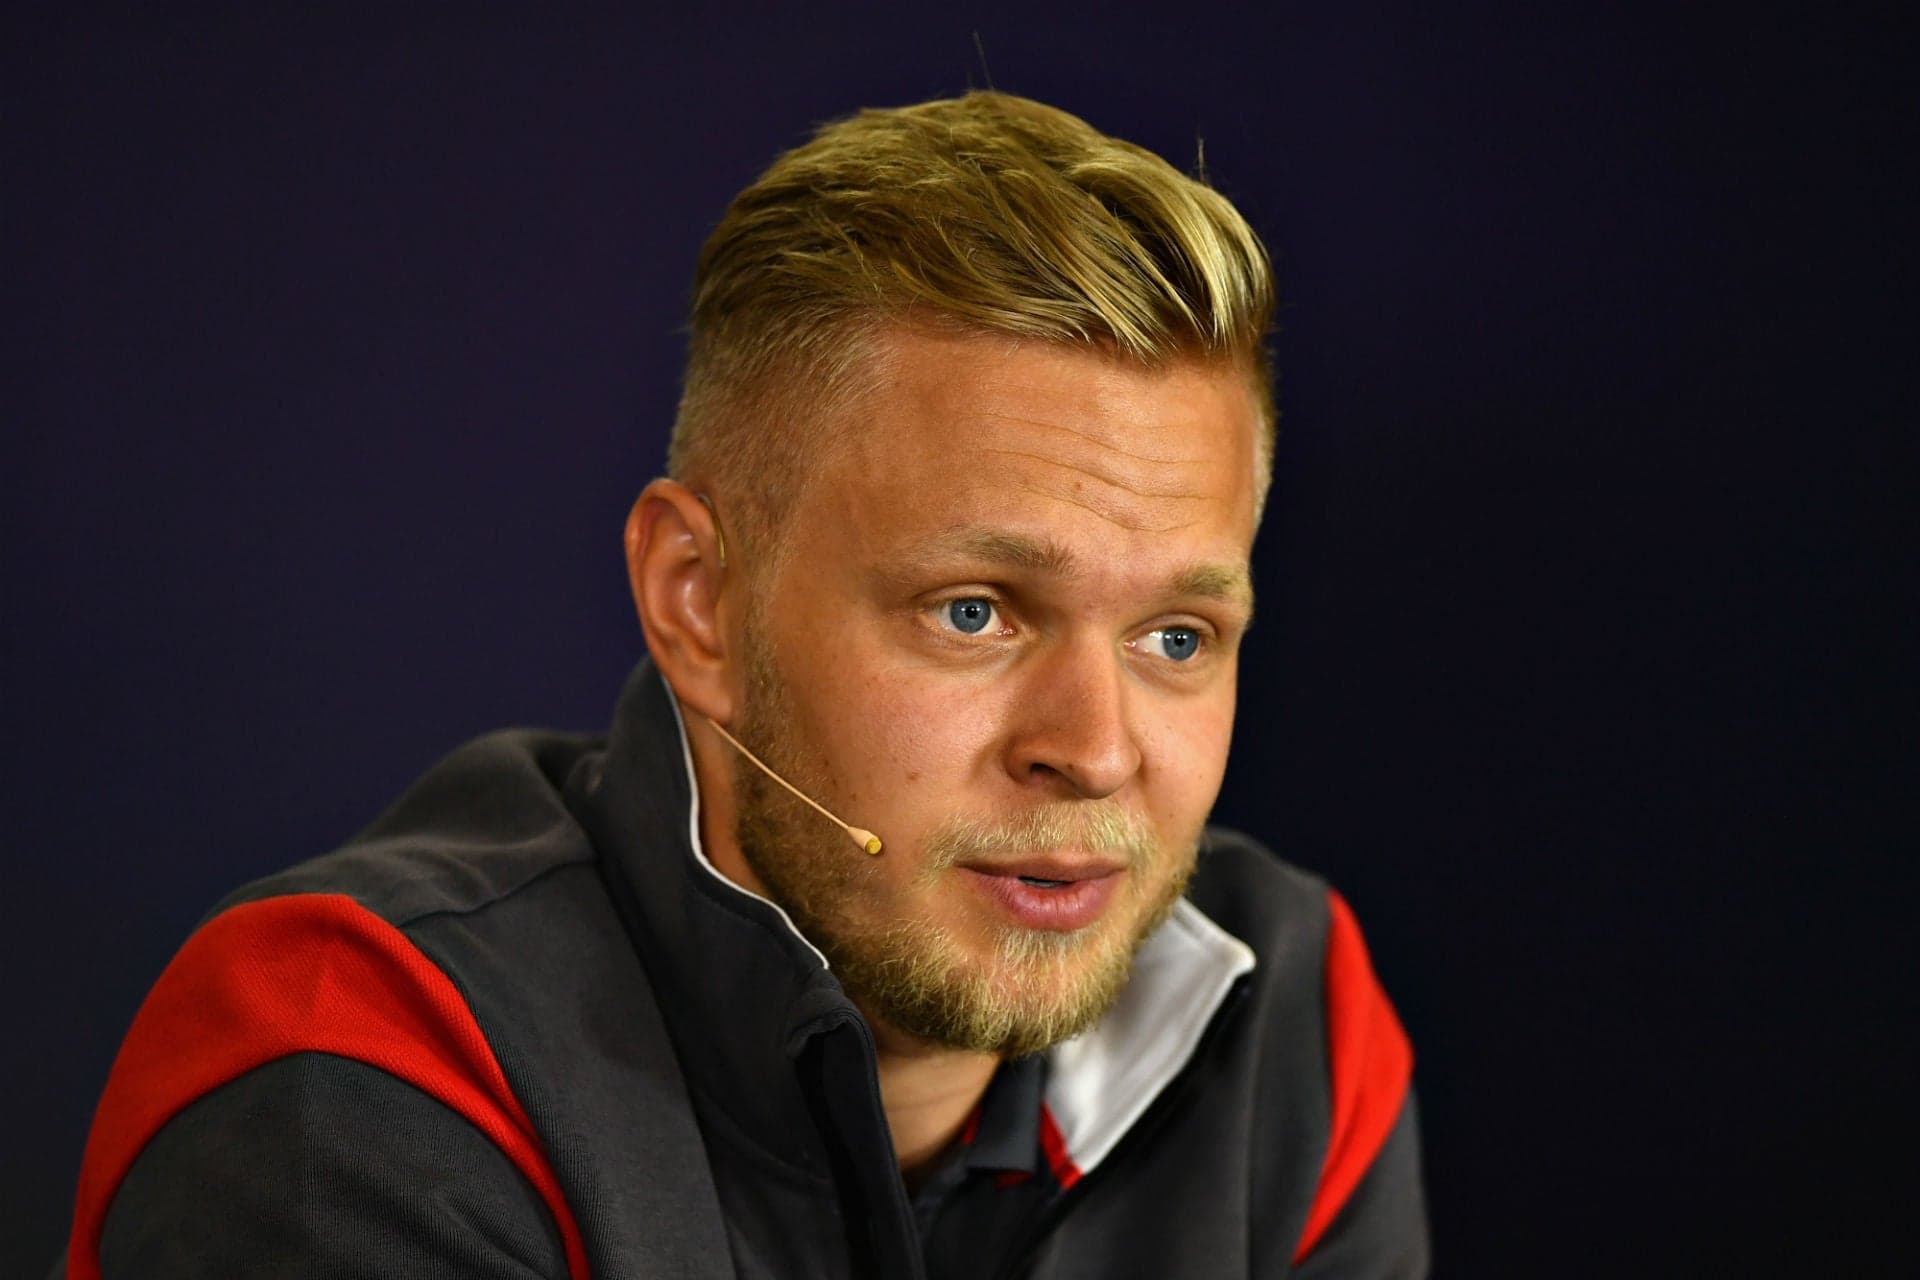 Haas F1 Driver Kevin Magnussen Upset That Hamilton is “Always In The Way”